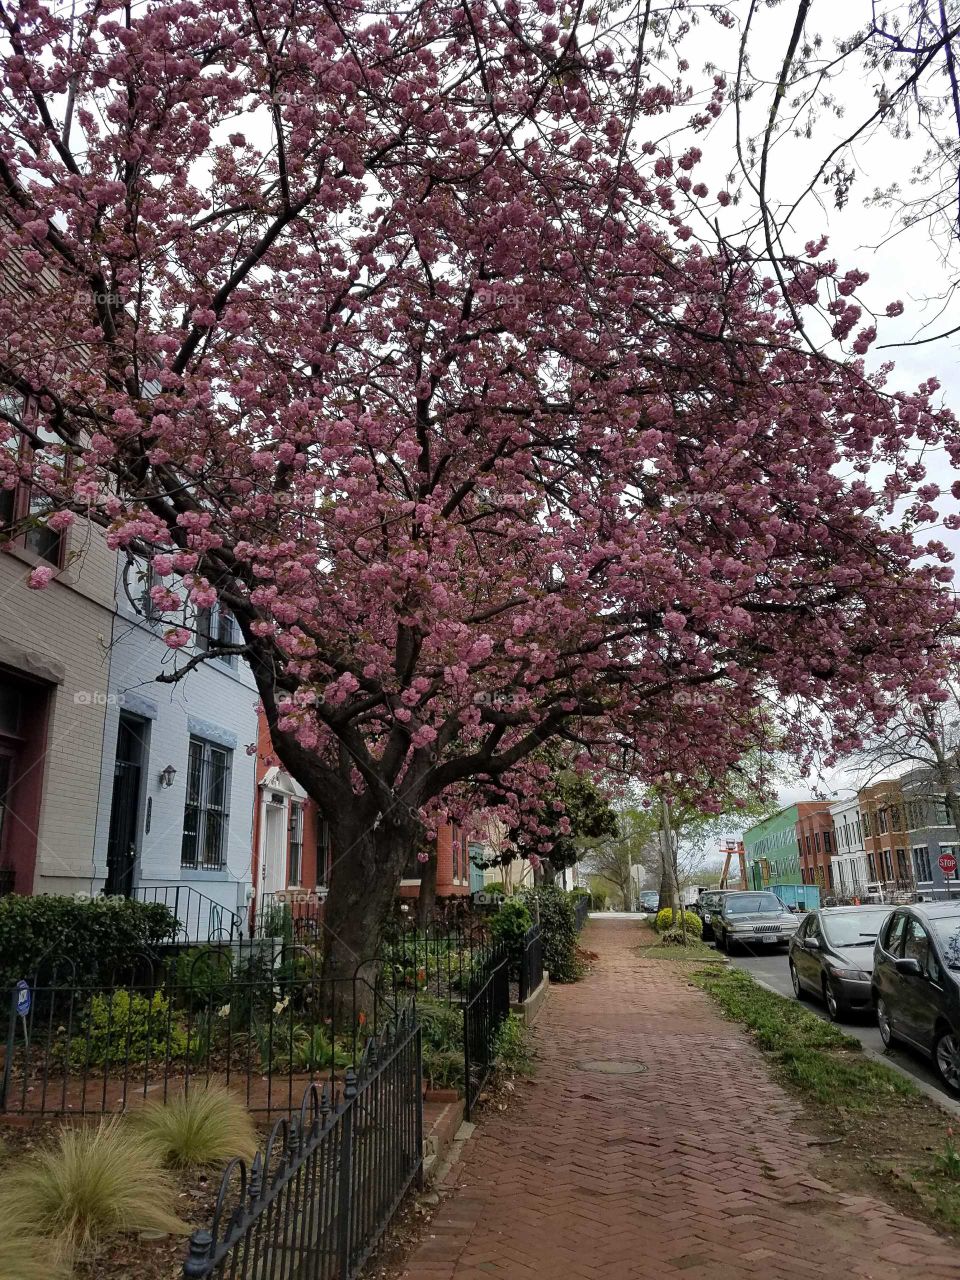 A street with trees in bloom in the historic Capitol Hill neighborhood of Washington, DC. Photo taken April 2018.